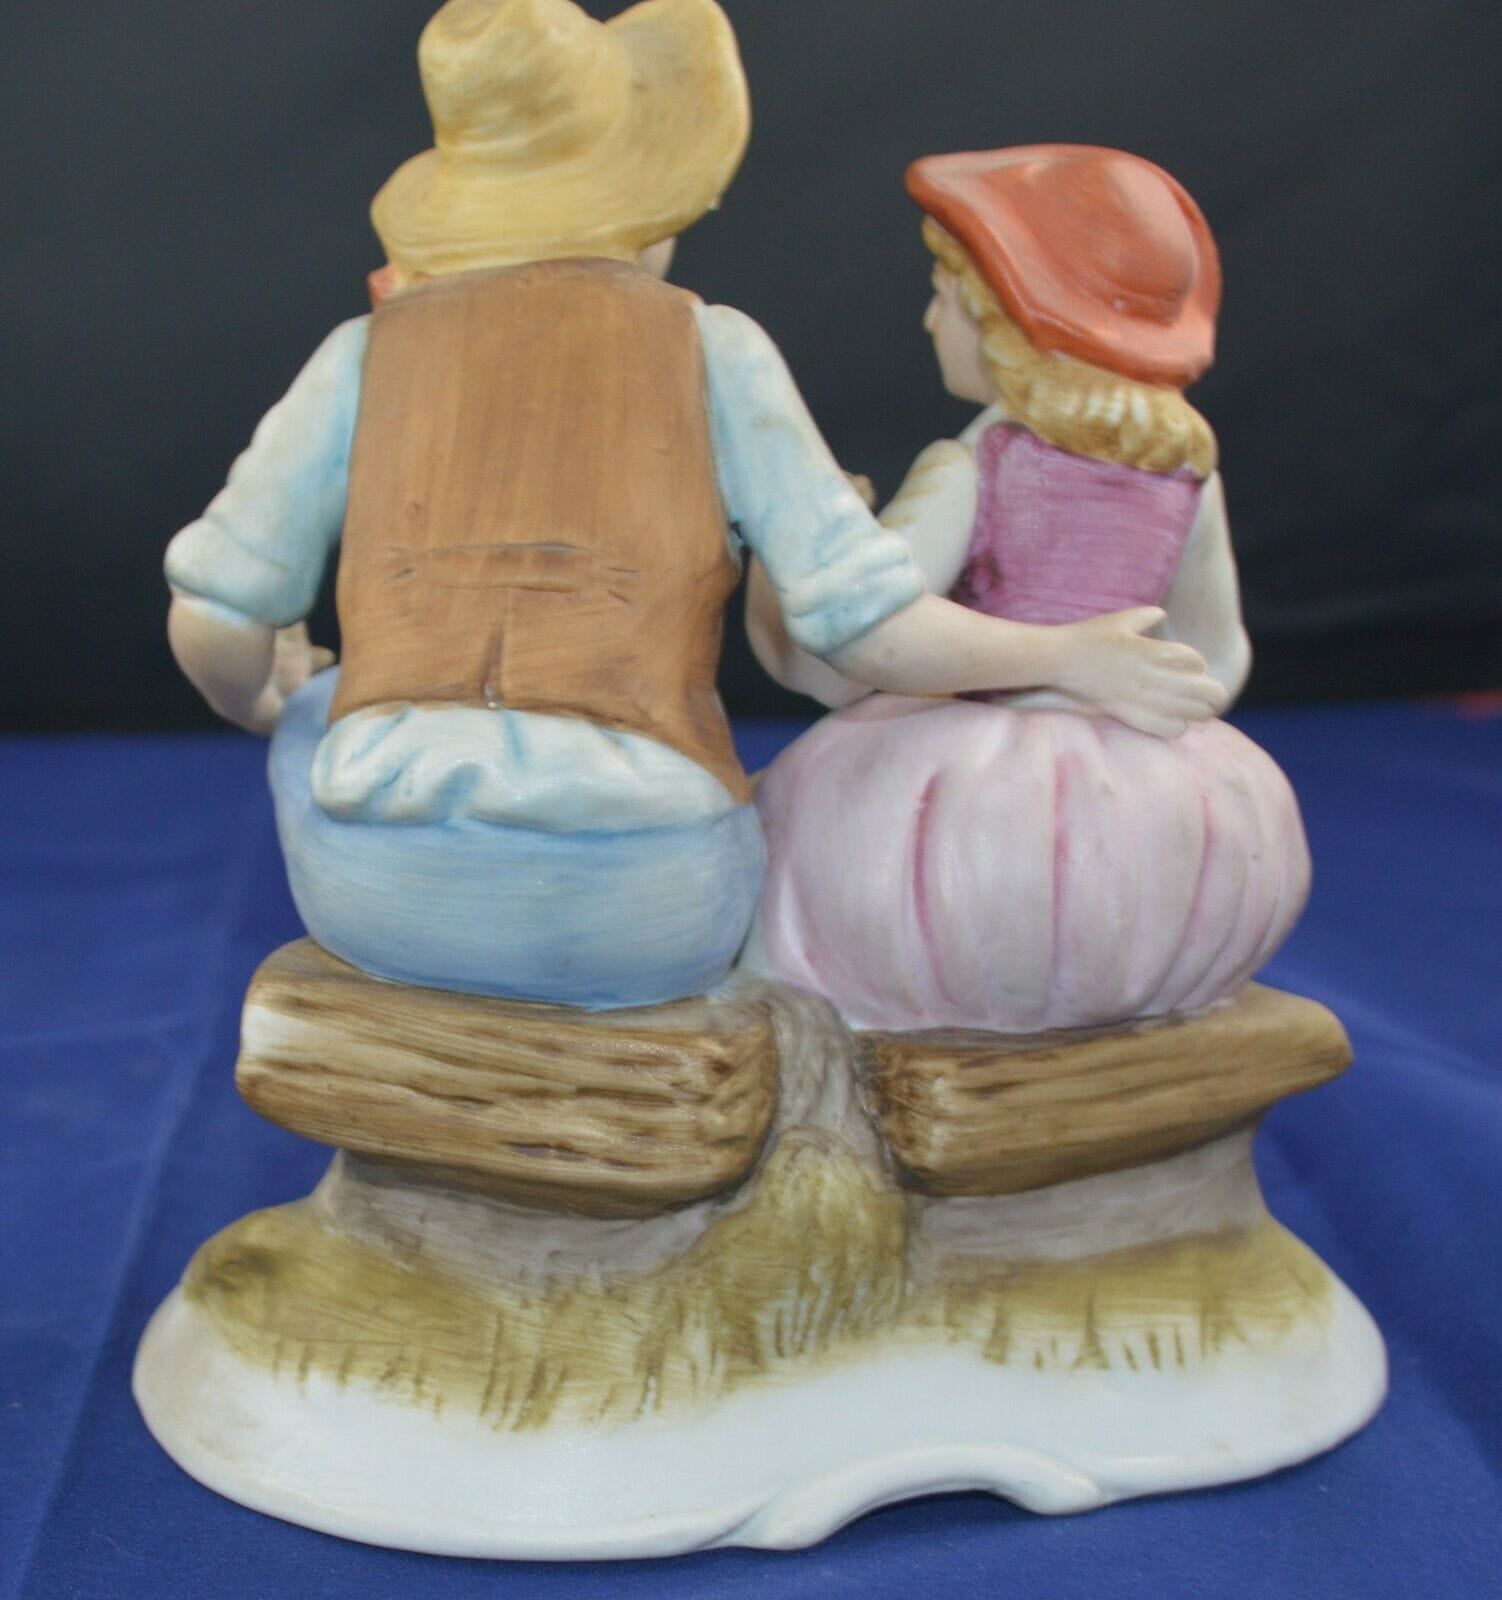 DECORATIVE FIGURINE YOUNG LADY AND YOUNG MAN(PREVIOUSLY OWNED) FAIRLY GOOD CONDITION - TMD167207